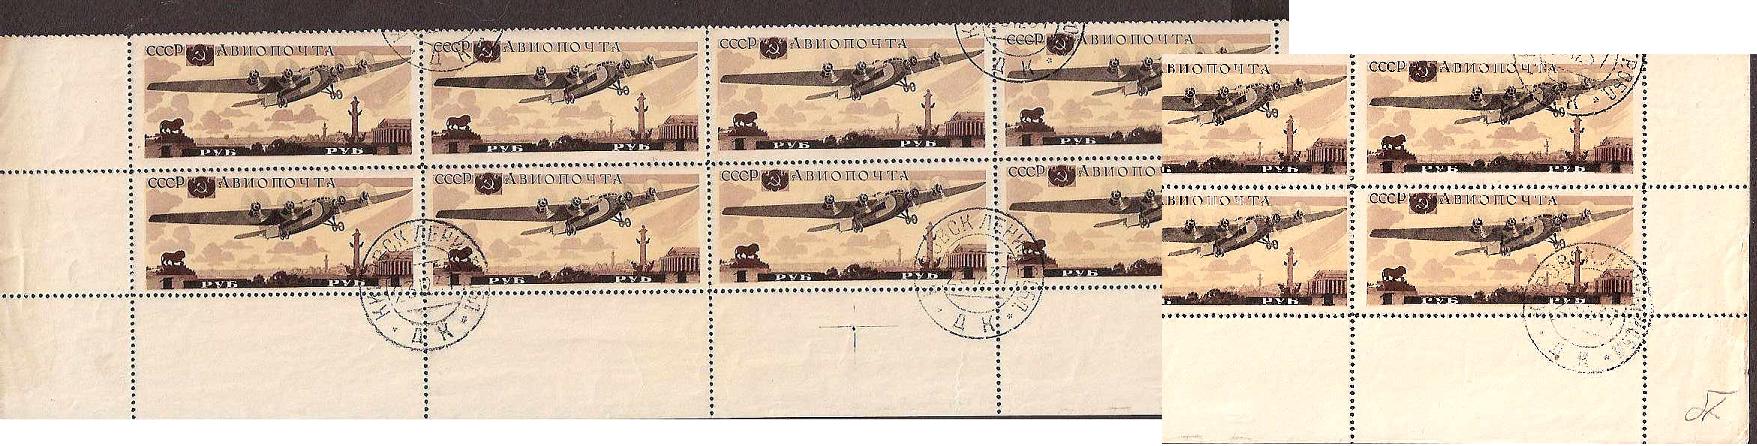 Russia Specialized - Airmail & Special Delivery Cheliuskin issue Scott C75 